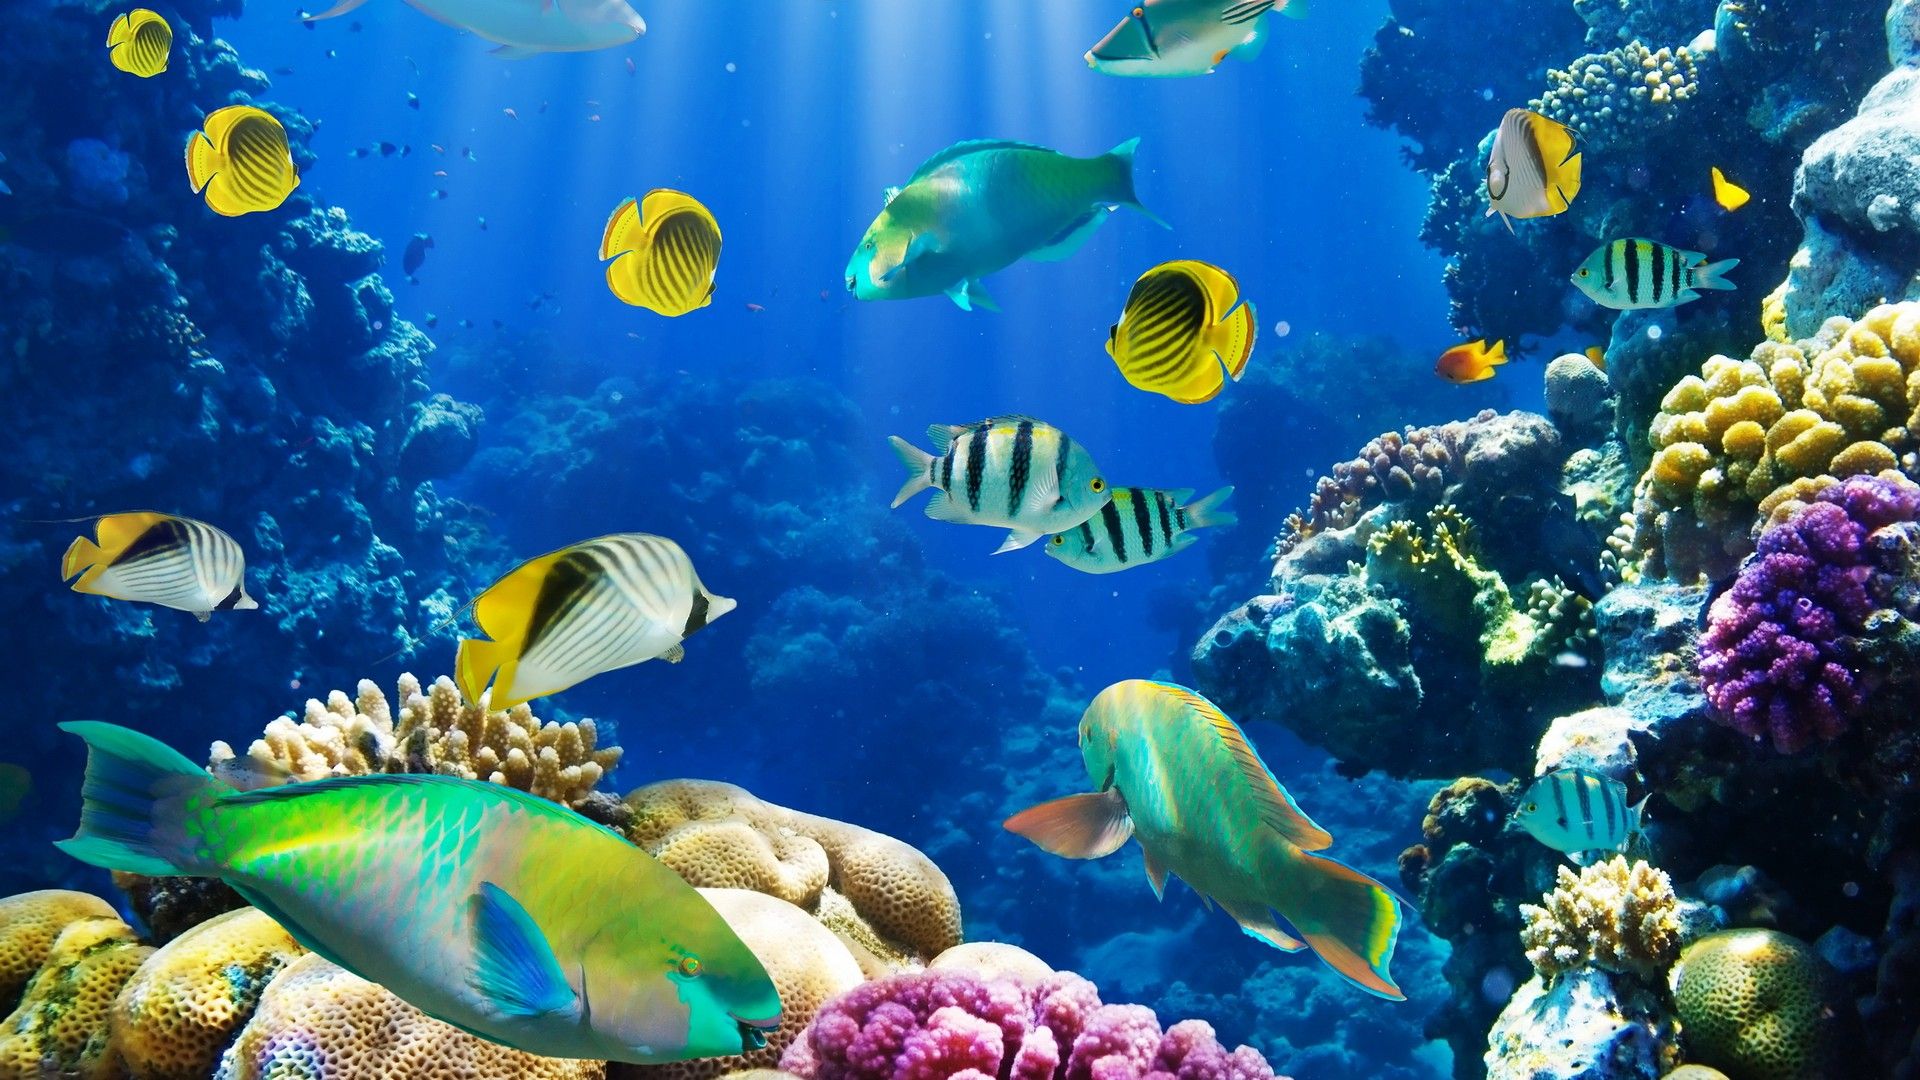 Coral Reef HD Wallpaper - Coral Reef Photos, New Backgrounds